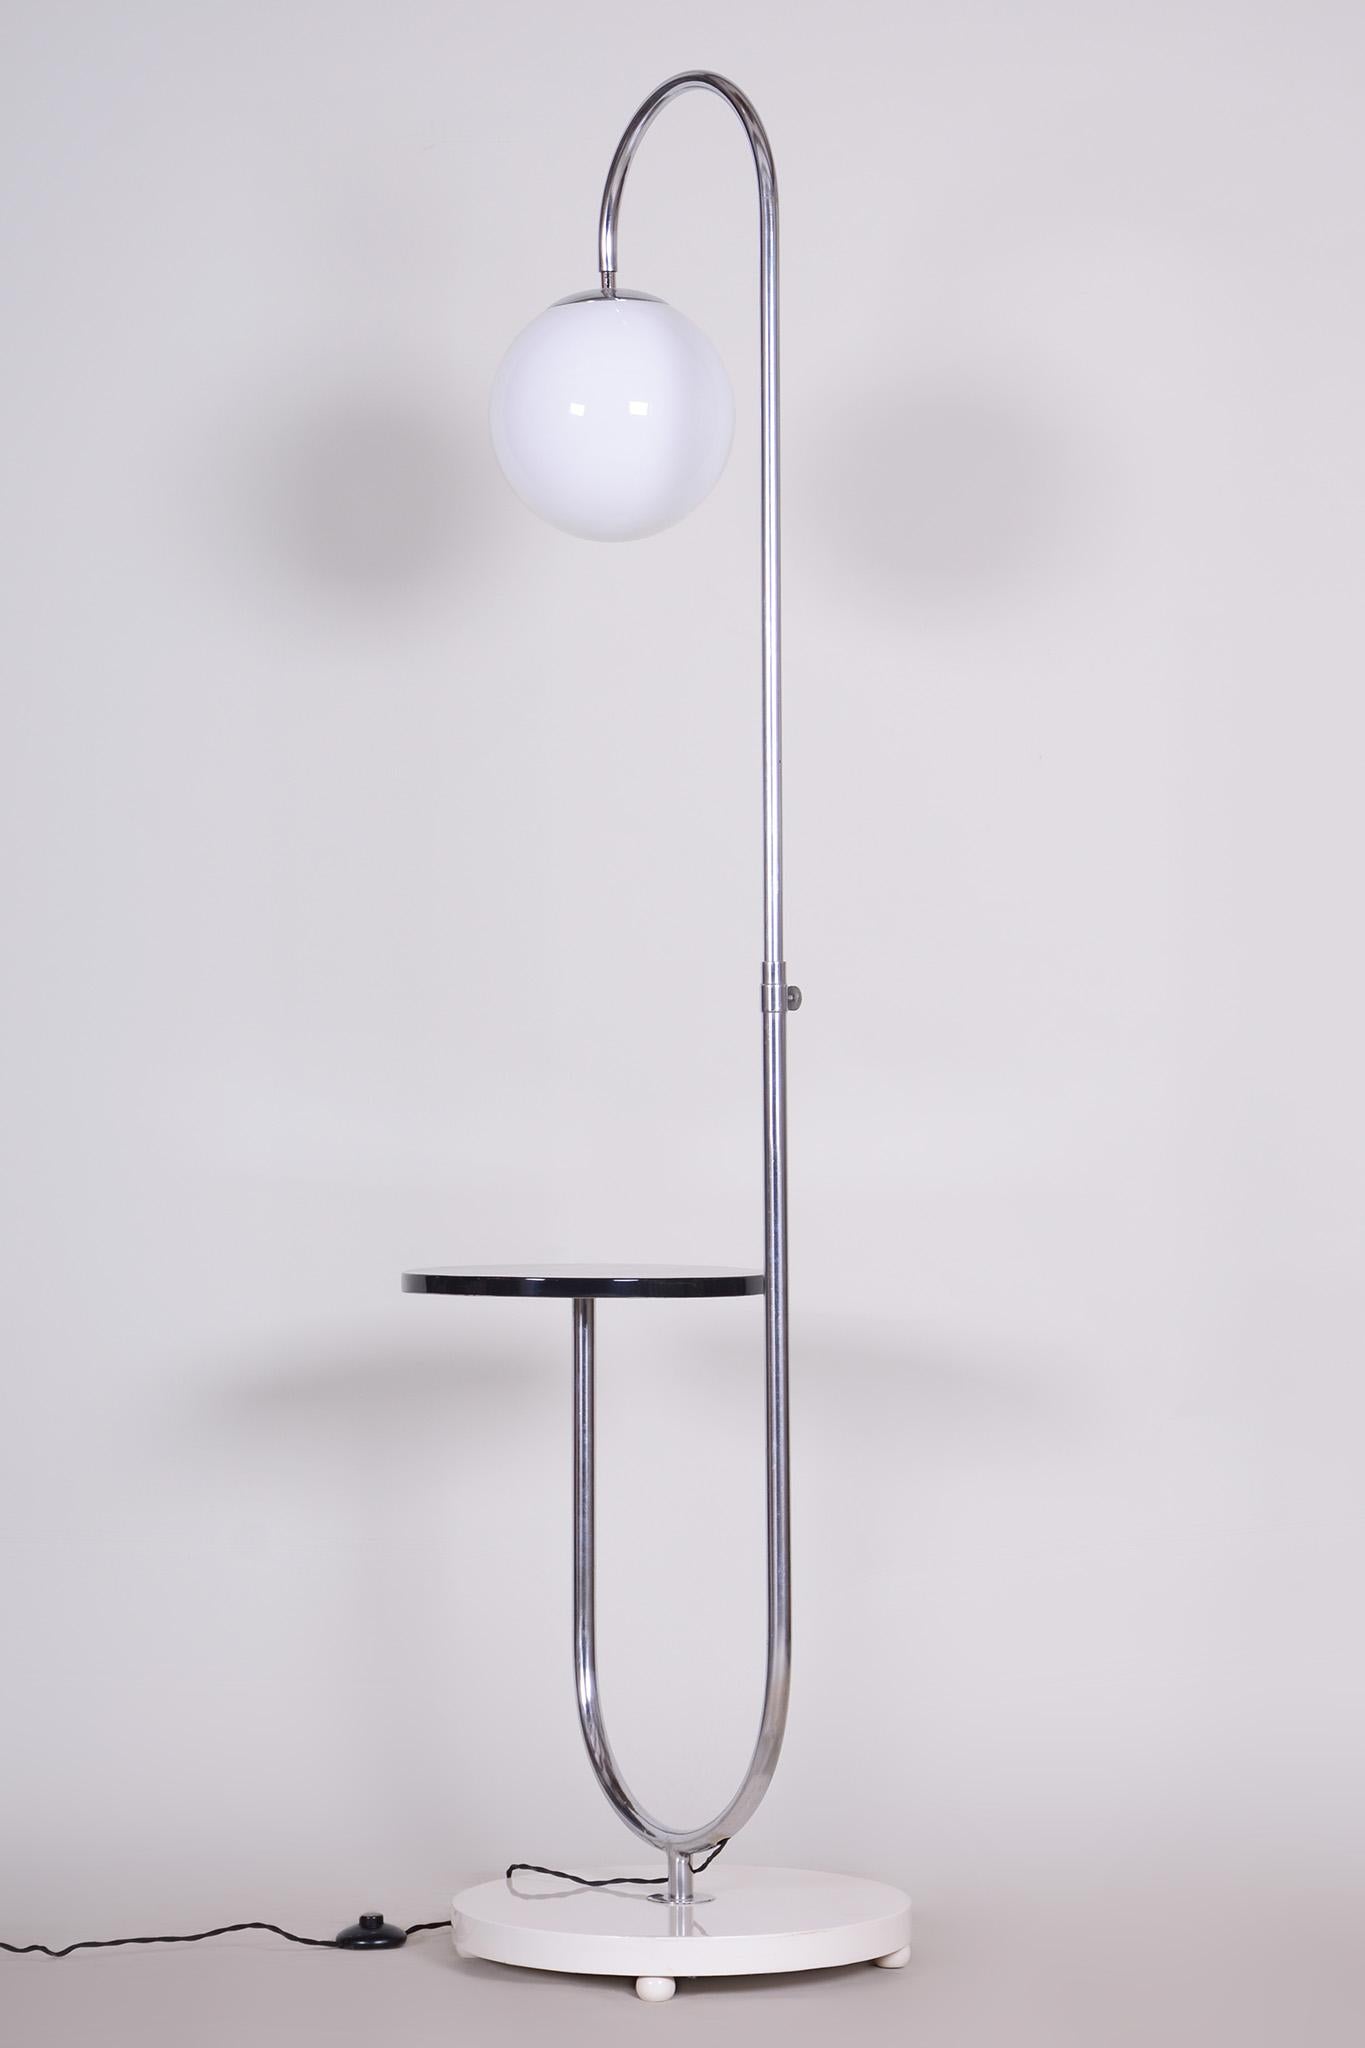 Czech Art Deco Floor Lamp Made 30s, Designed by Halabala, Made by UP Závody, Restored For Sale